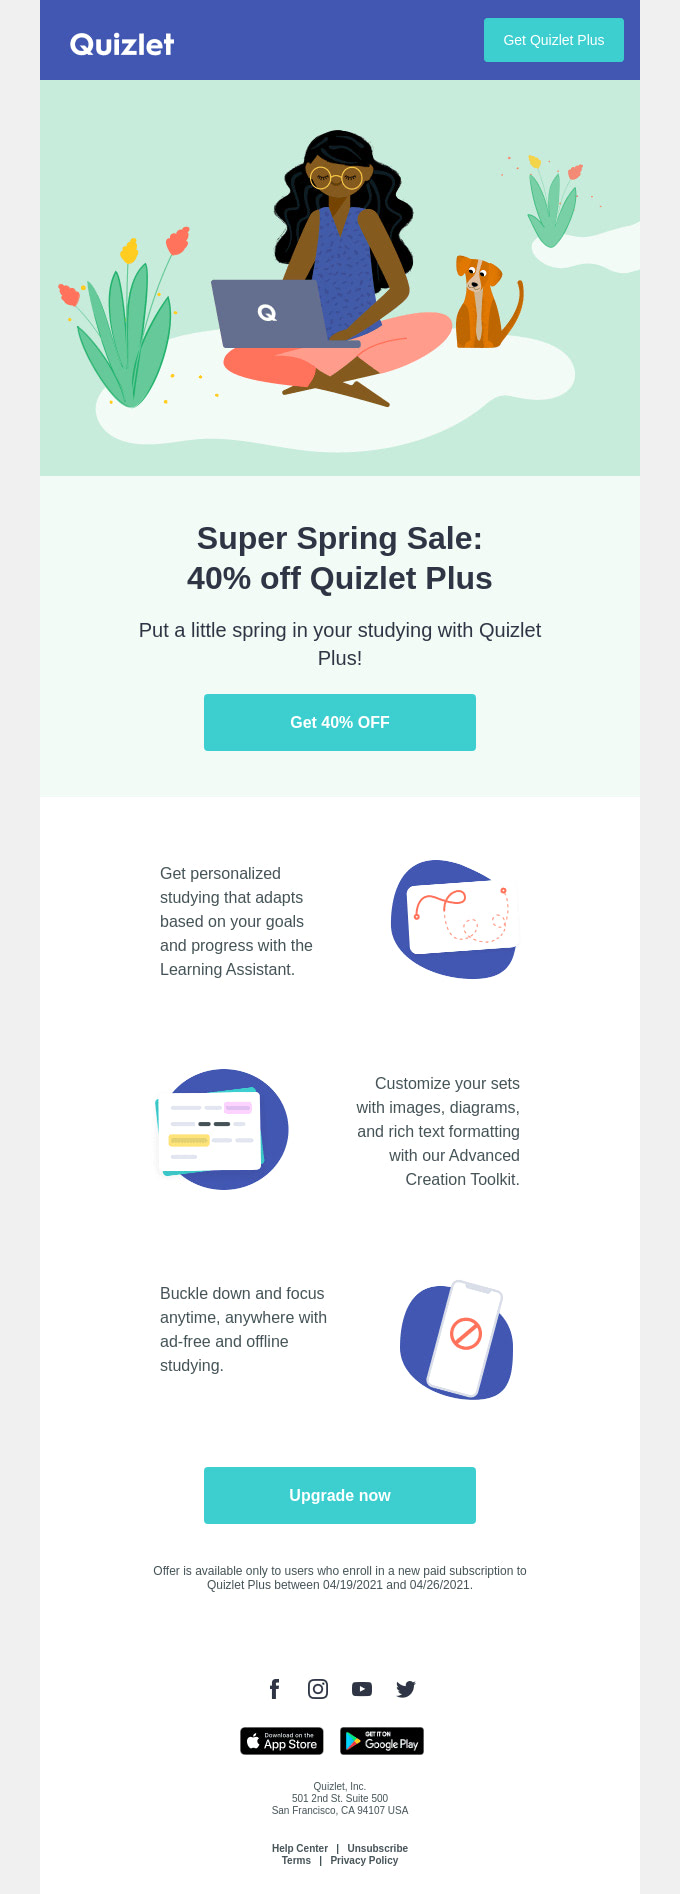 Email from Quizlet